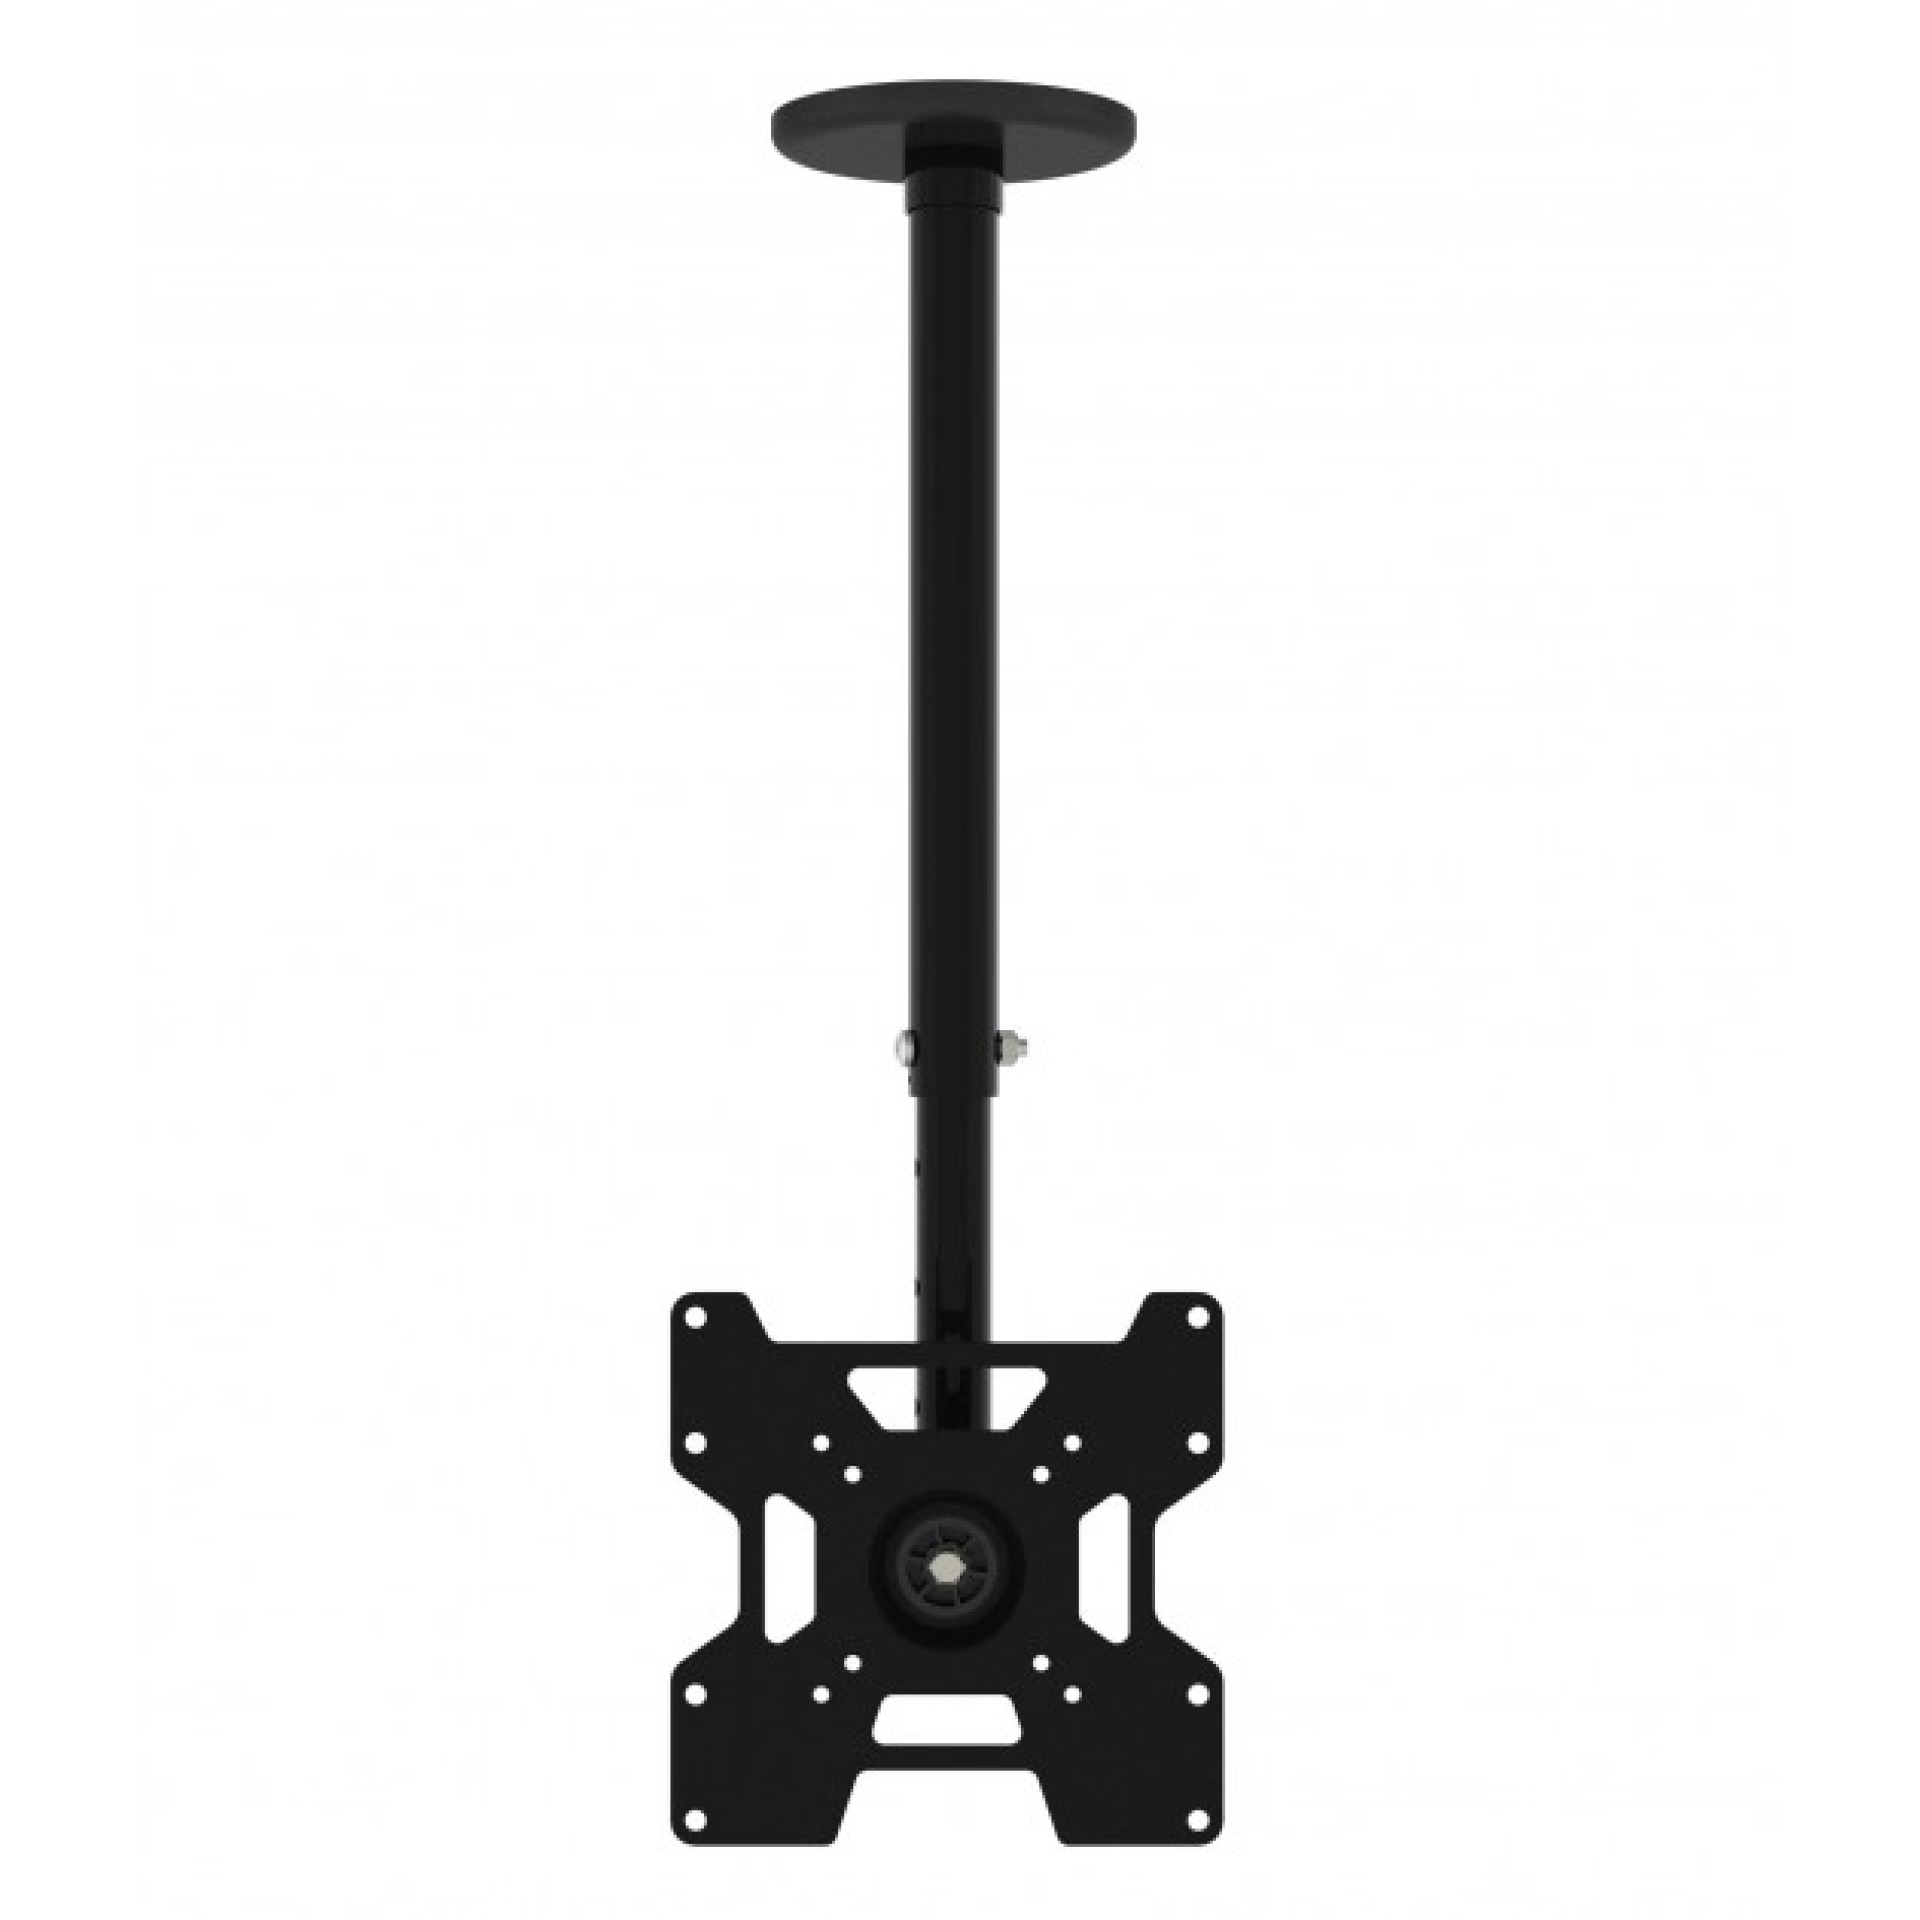 Telescopic ceiling mount for LED LCD, 23-37"